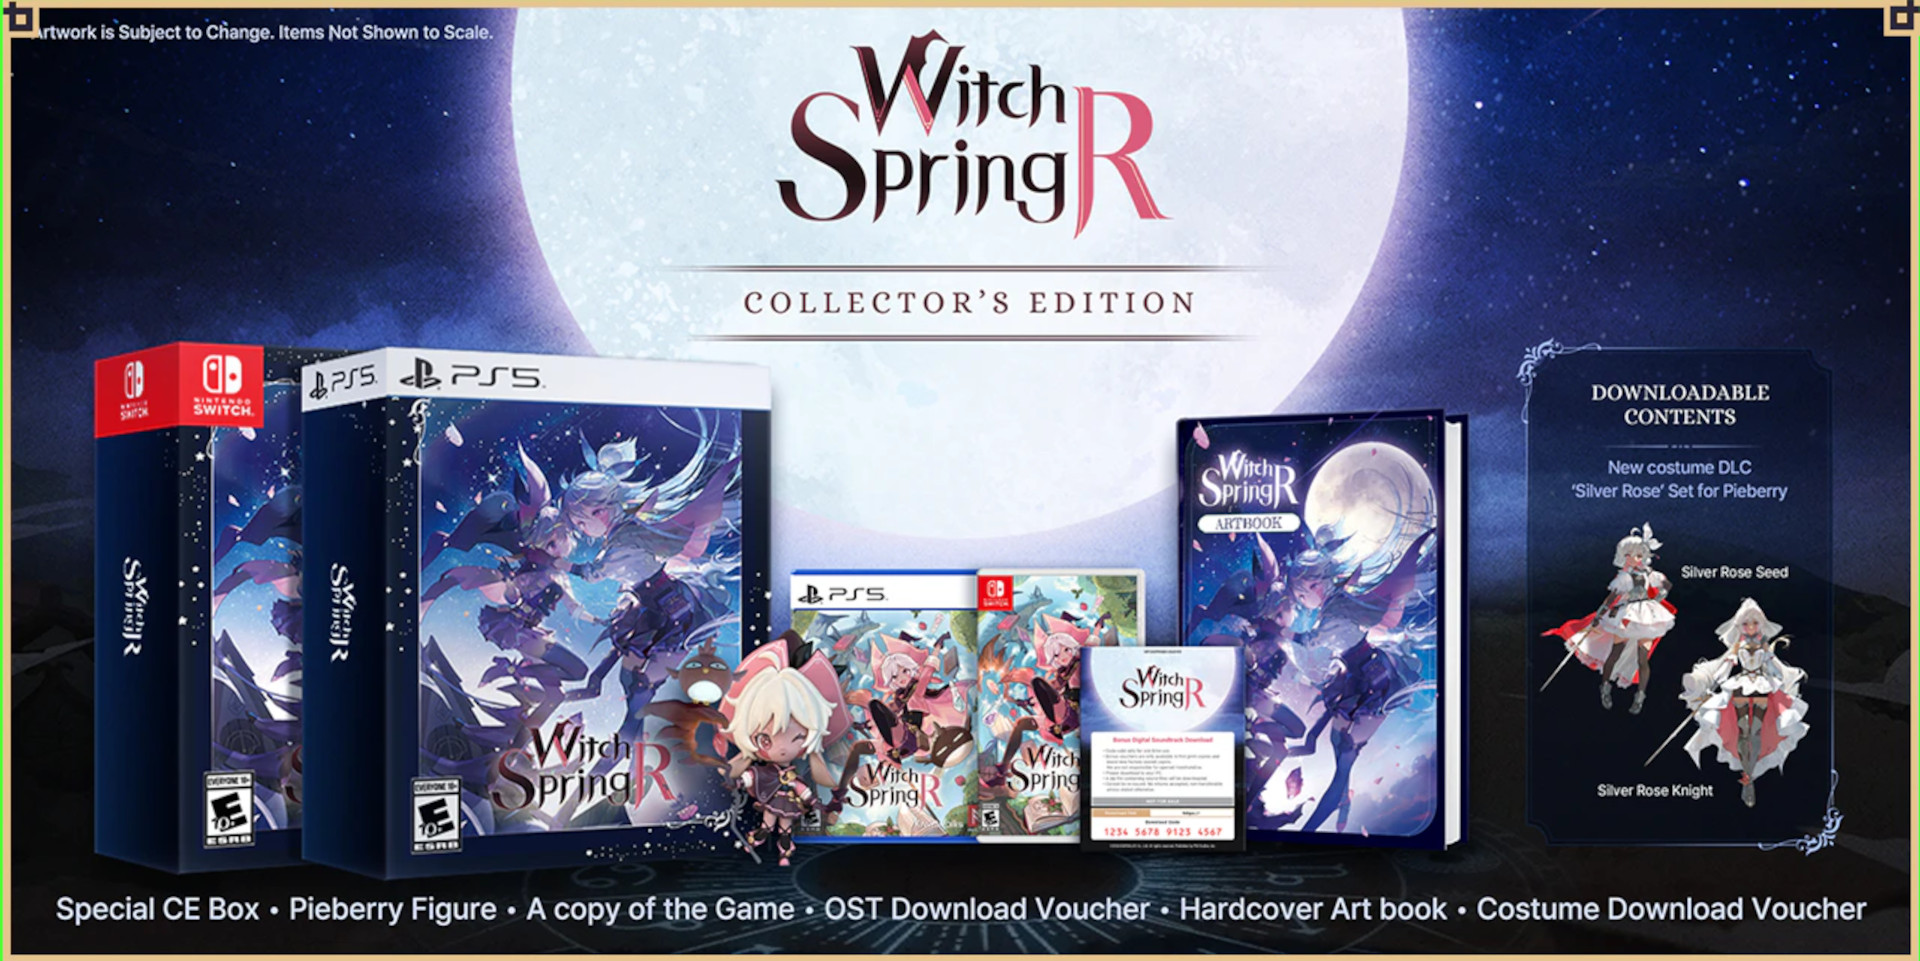 WitchSpring R Collector's Edition